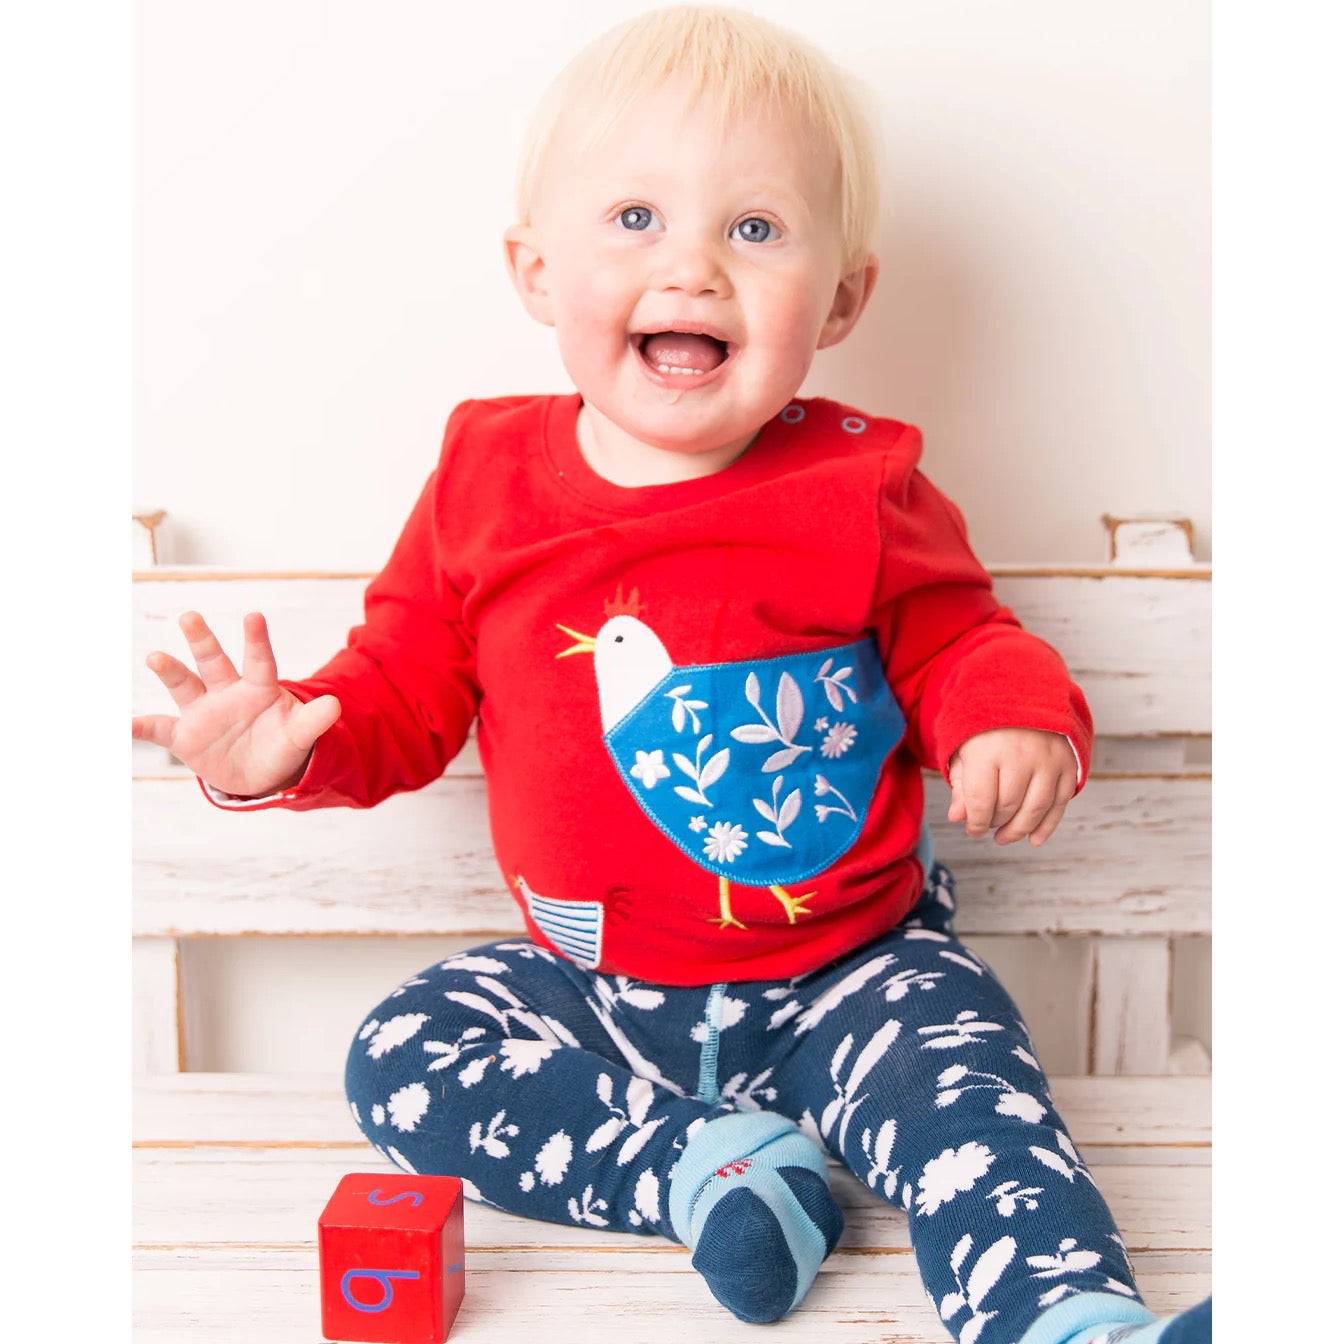 Blade & Rose Stella The Hen Infant T-Shirt Clothing 0-6M / Red,6-12M / Red,12-24M / Red